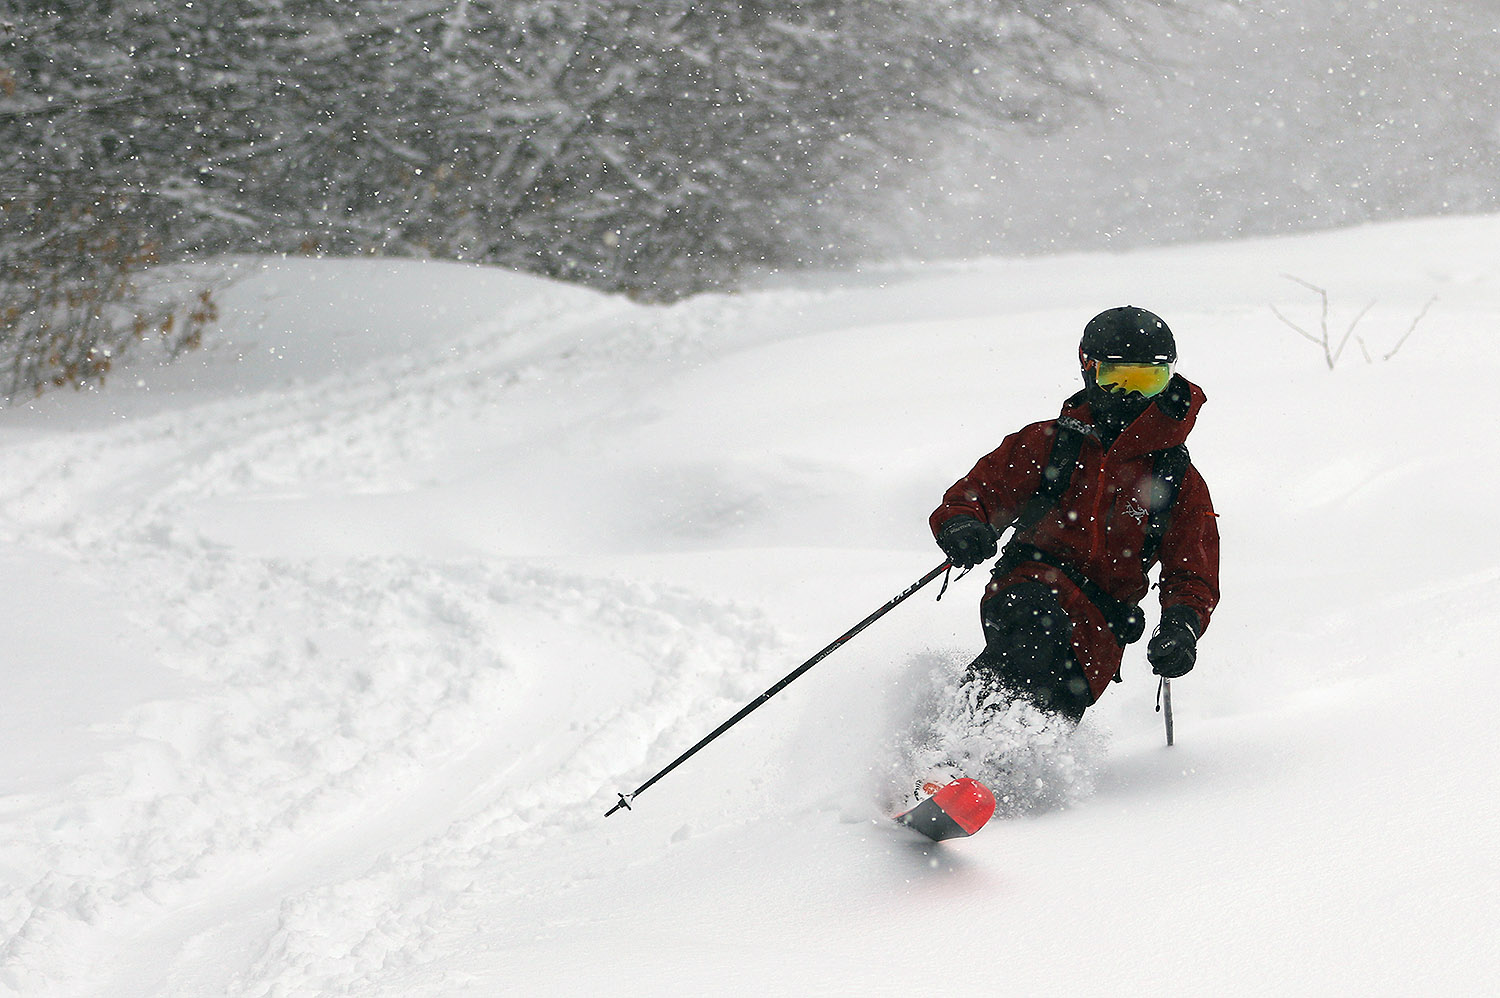 An image of Dylan Telemark skiing in fresh powder from Winter Storm Malcolm while we wait for the Timberline Quad chair to start loading at Bolton Valley Ski Resort in Vermont